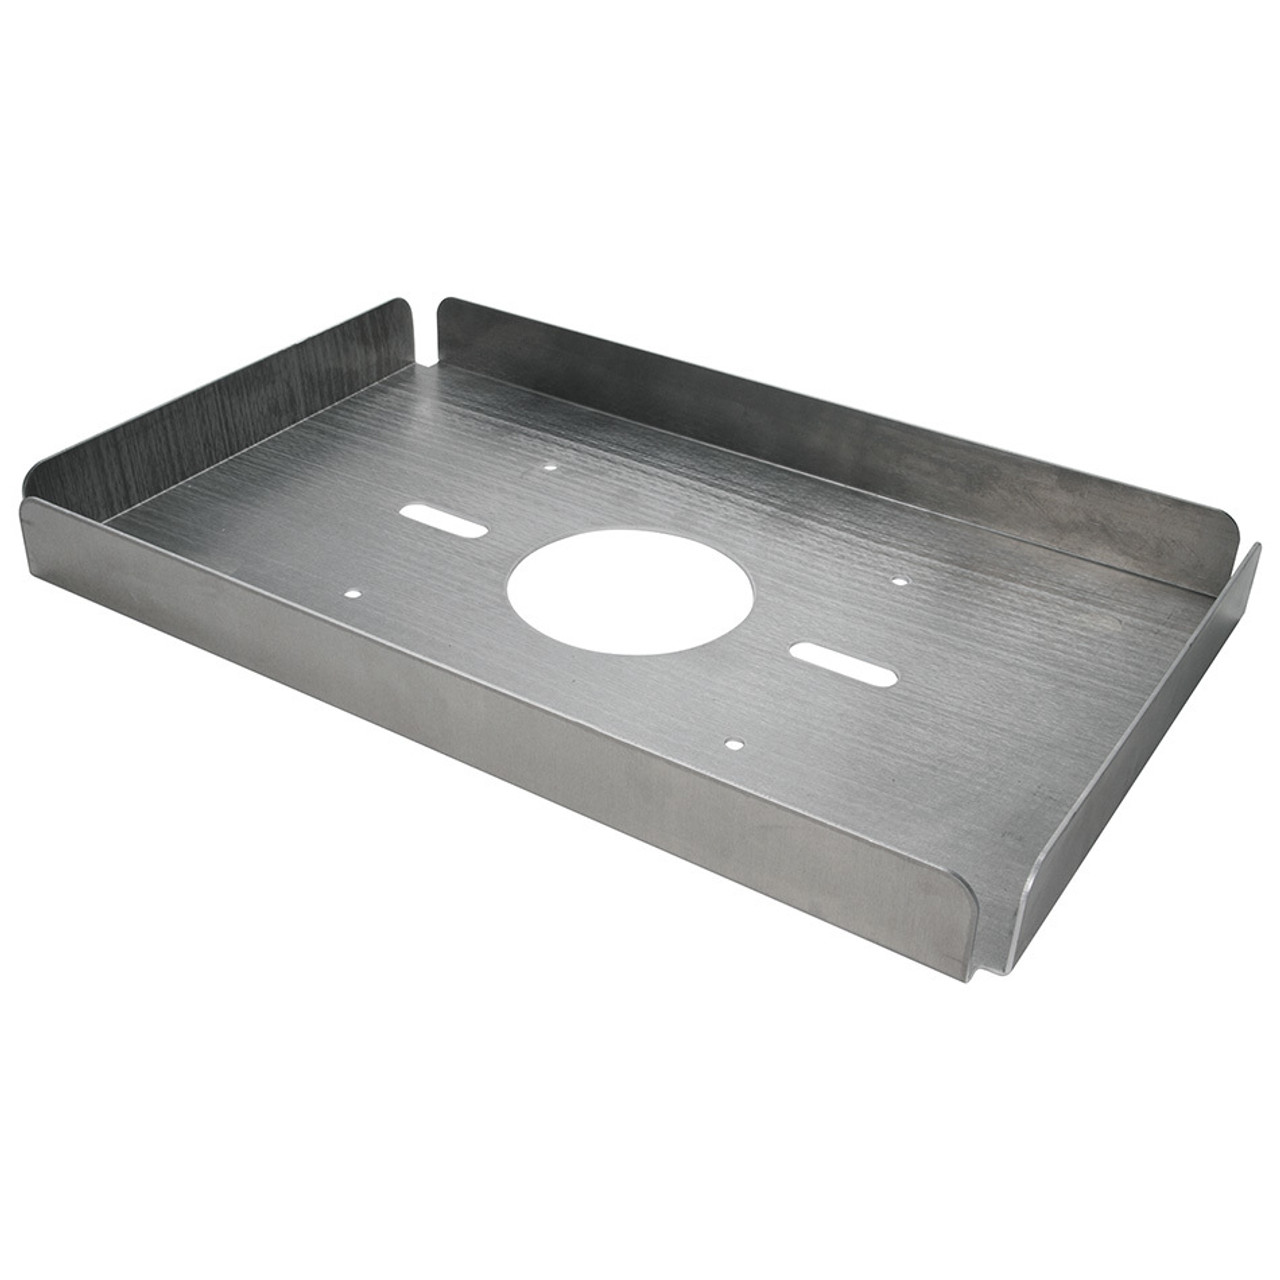 Allstar Performance All23266 Flat Scoop Tray for 4150 Carb